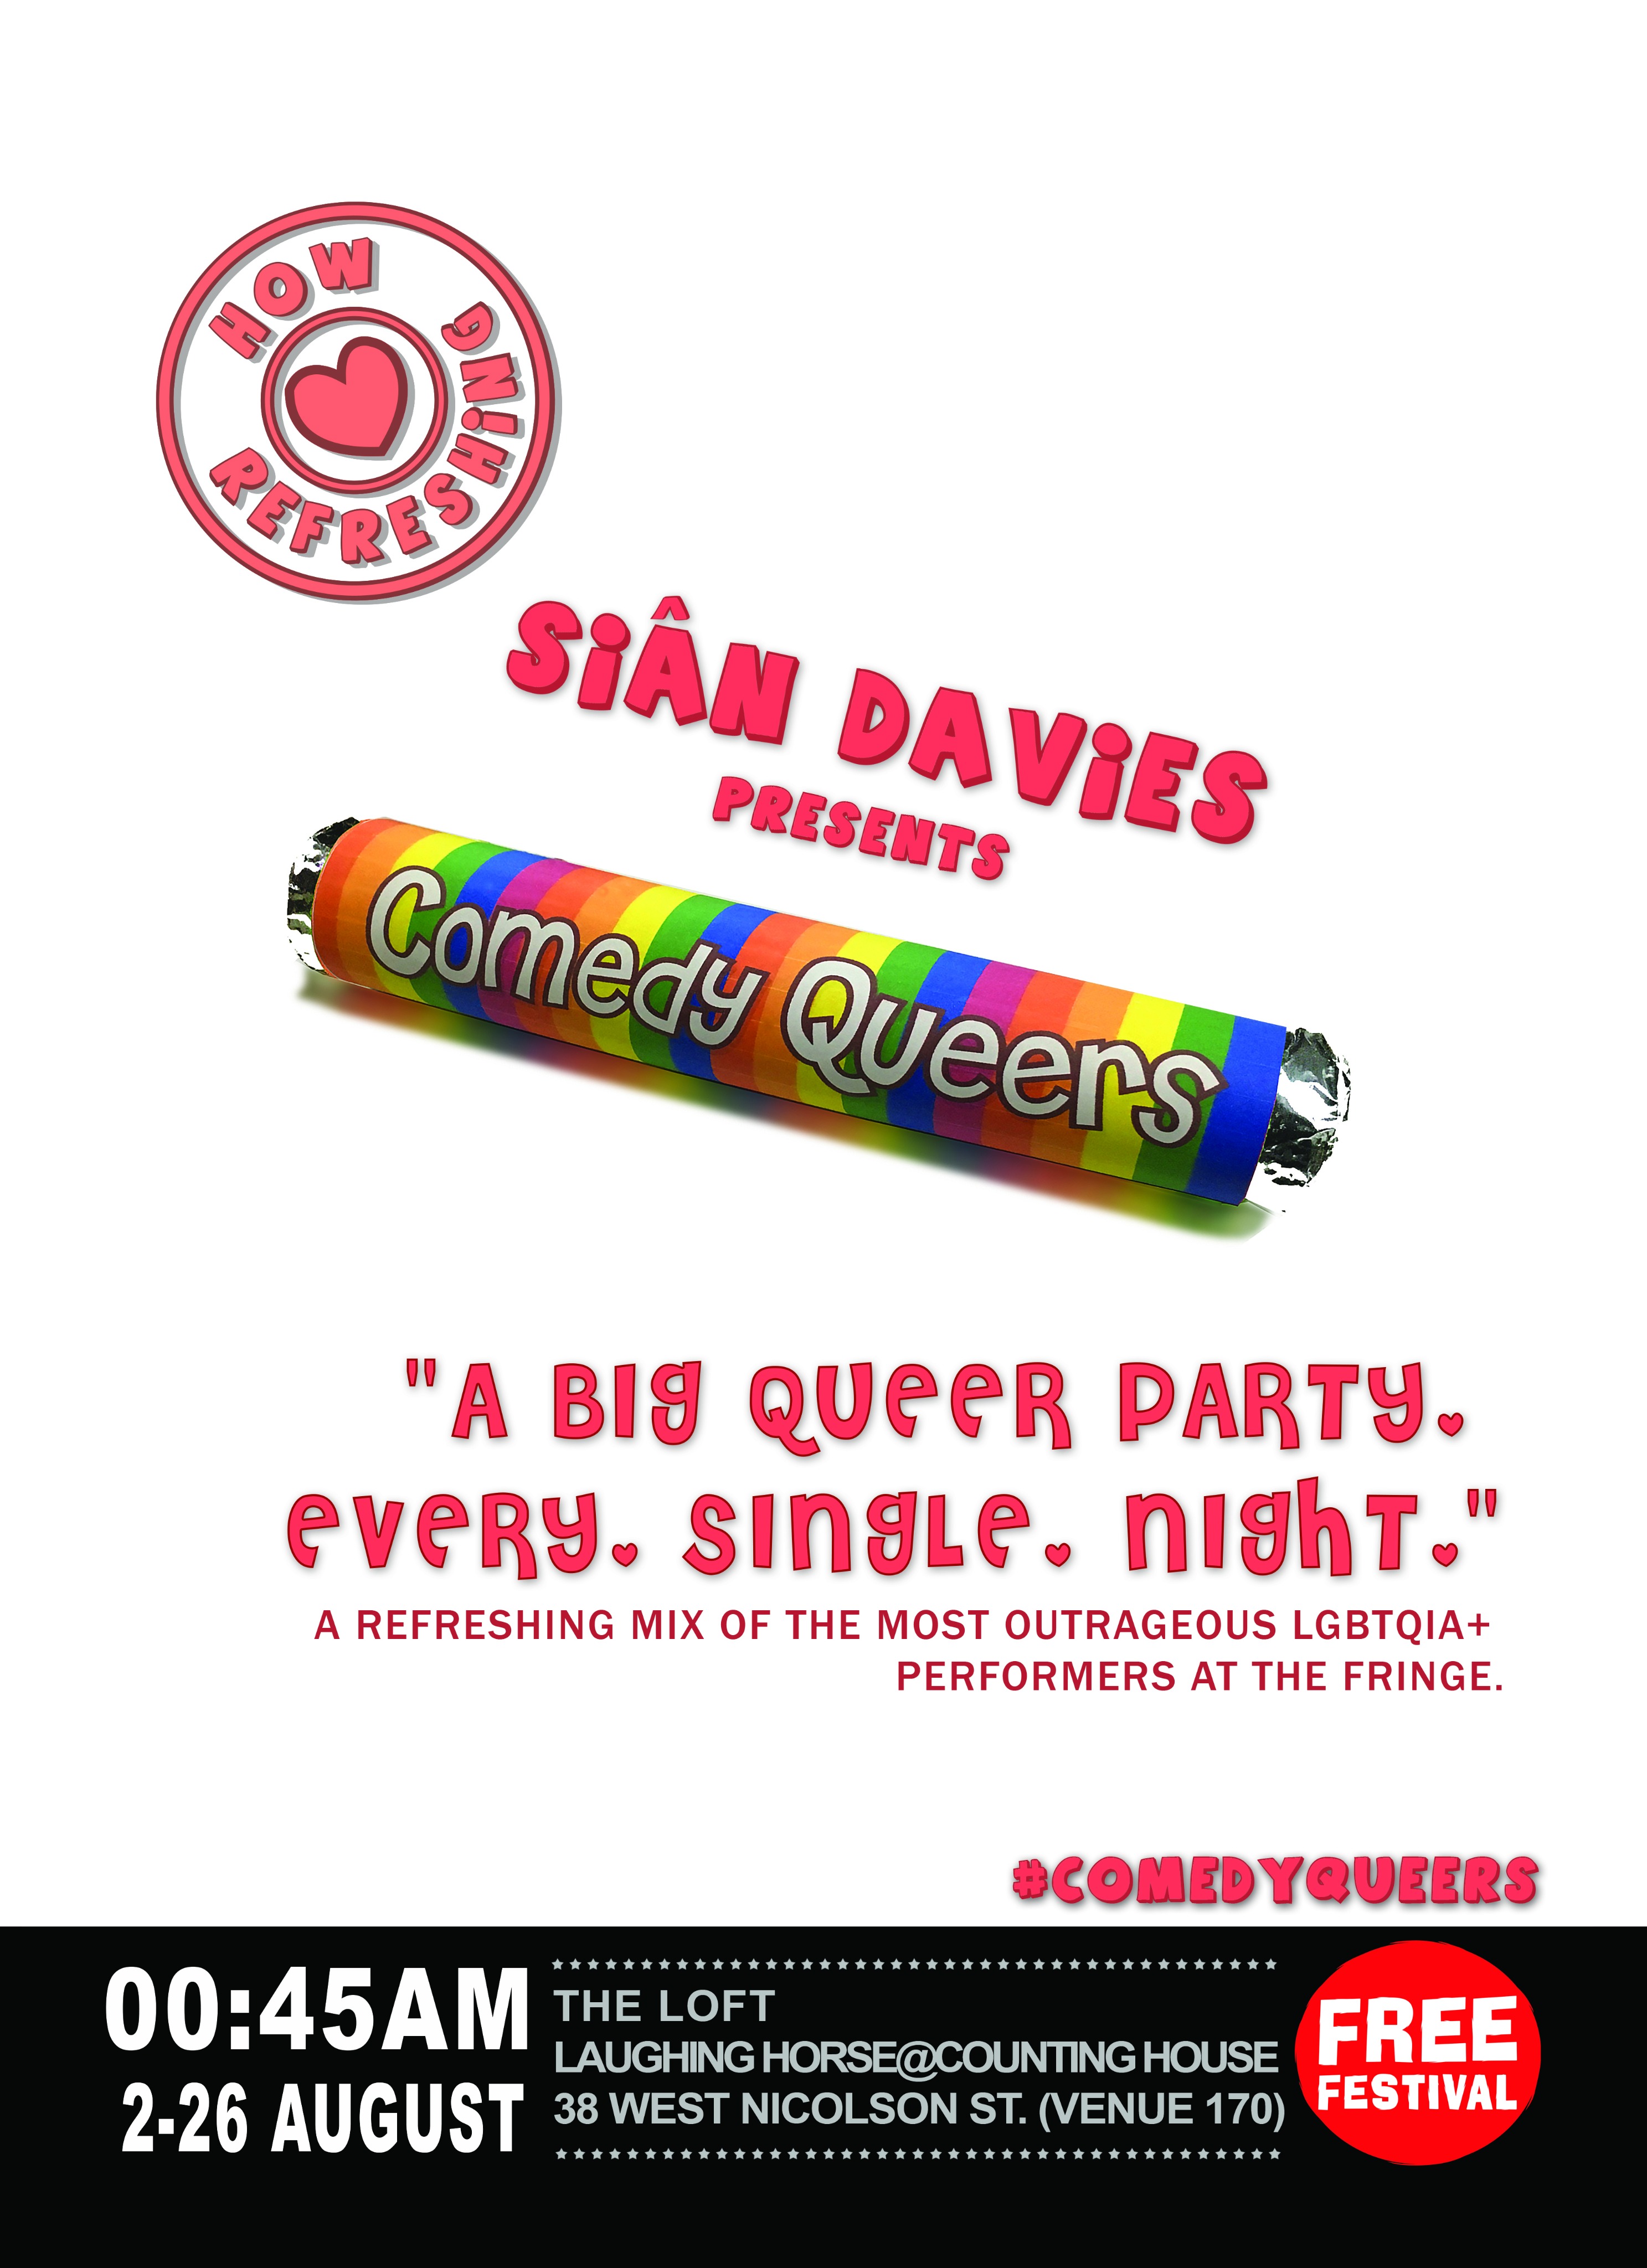 The poster for Comedy Queers / Free Festival